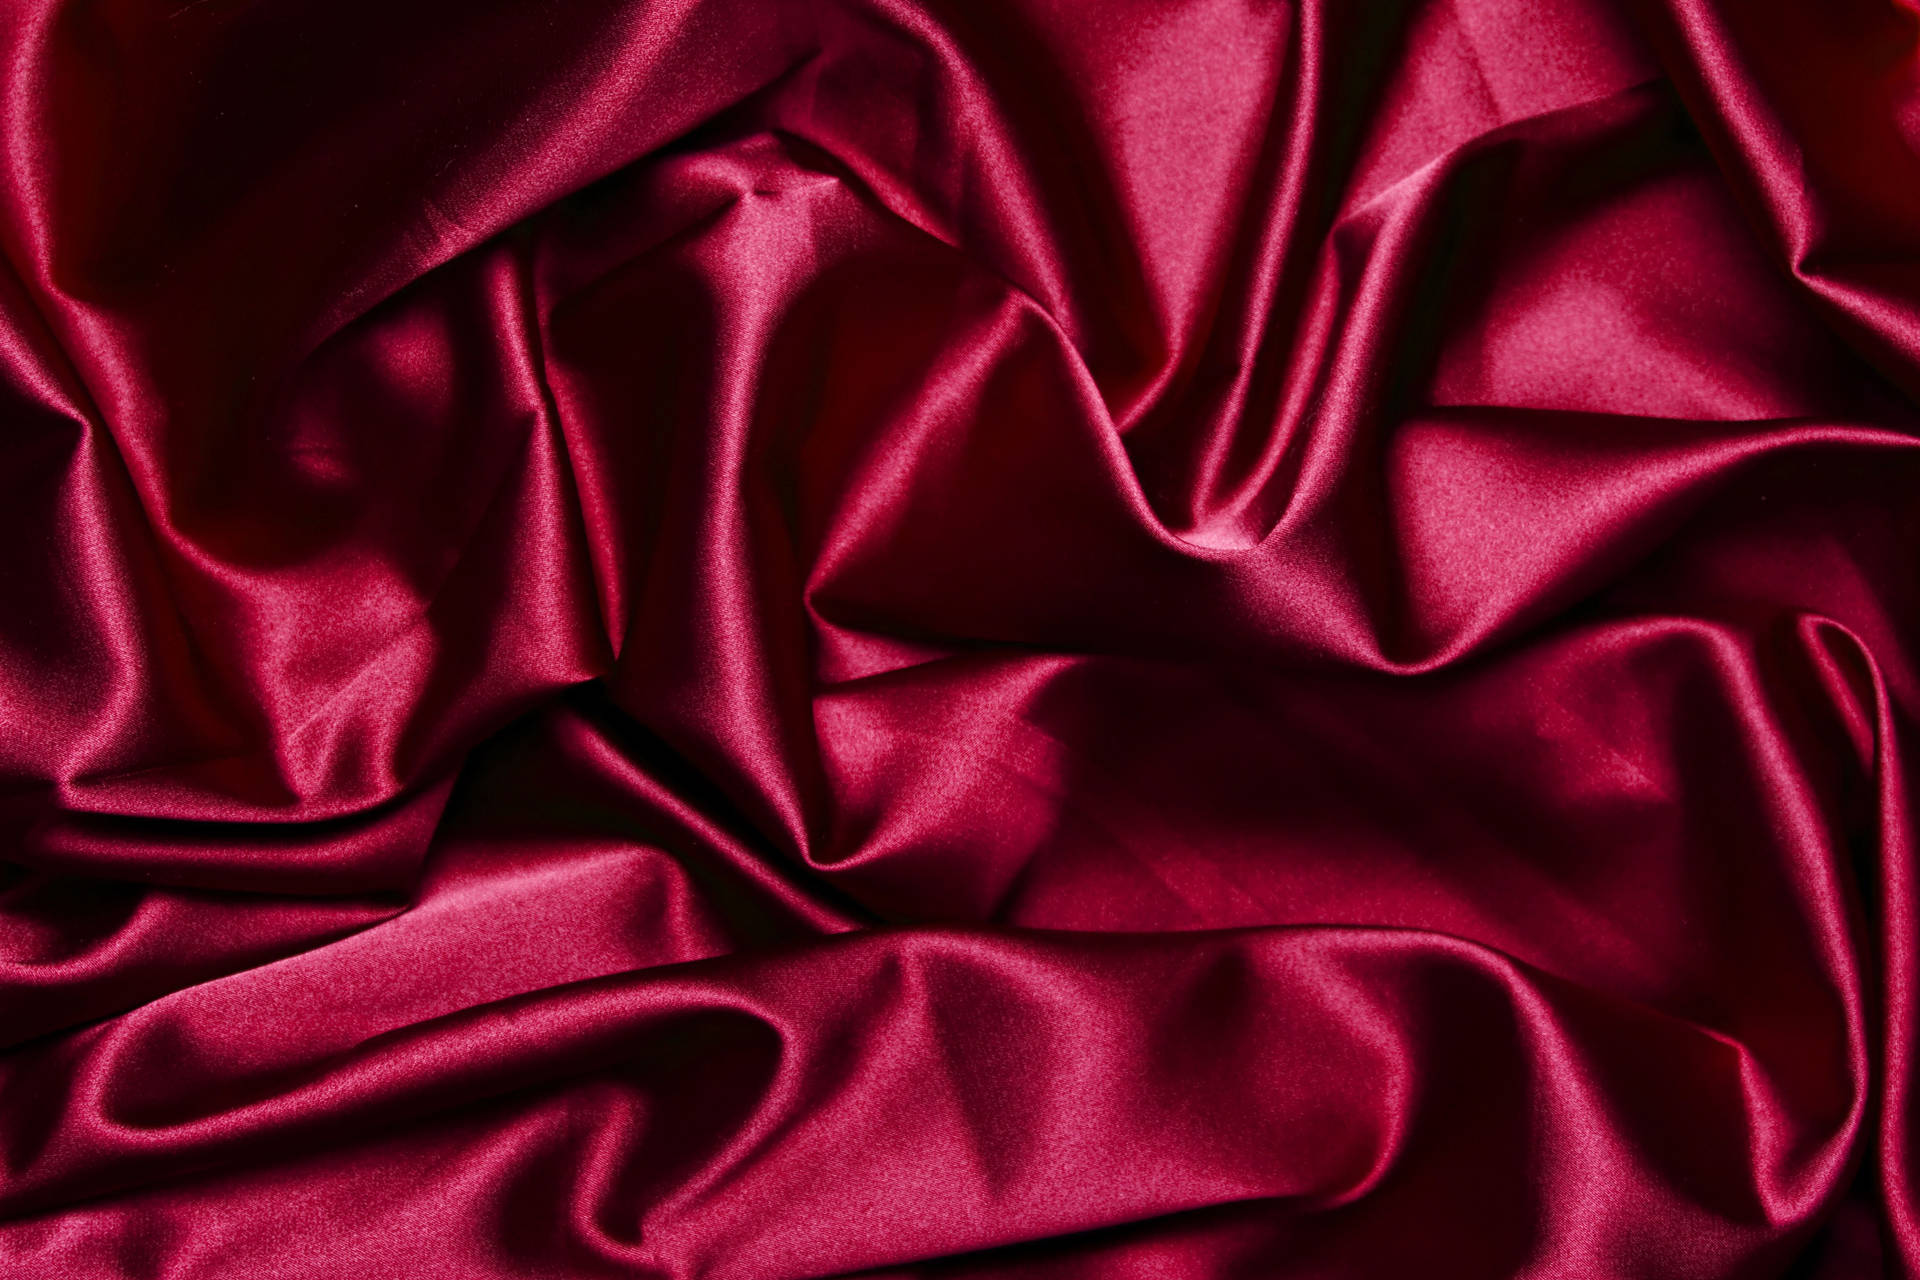 Texture Smooth Red Satin Fabric Wallpaper